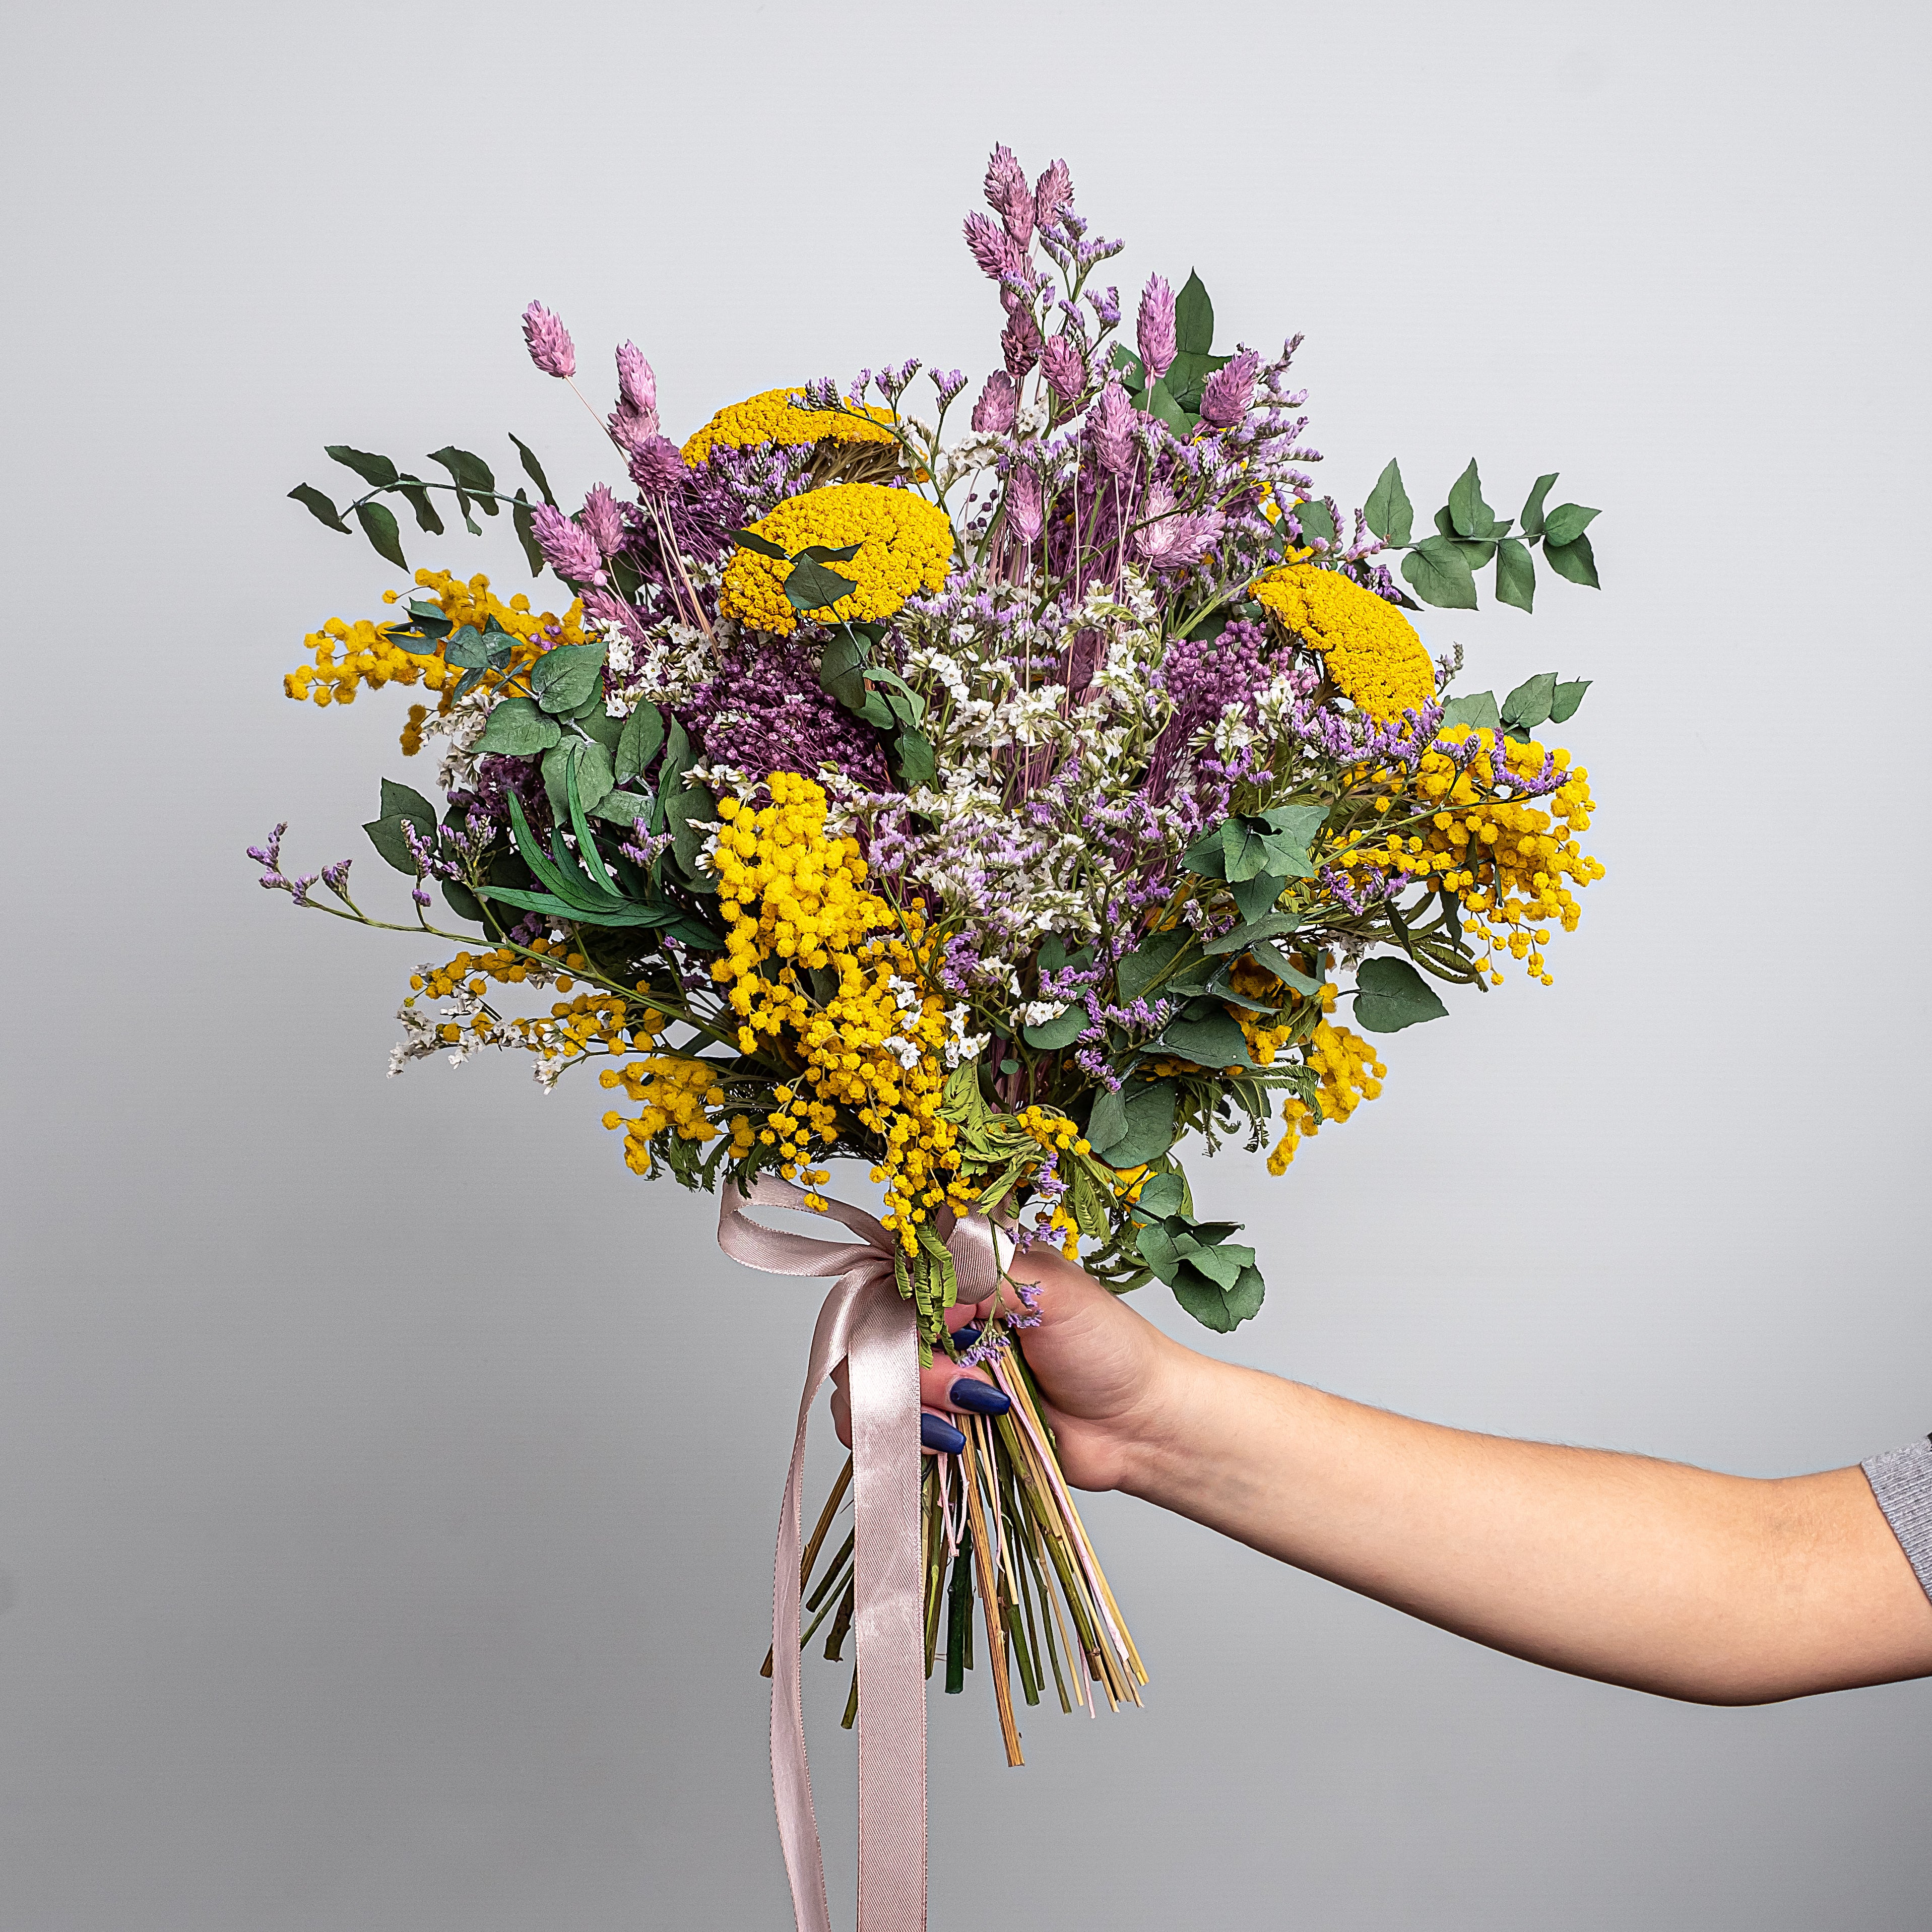 3 Amazing New Dried Flower Bouquets for Mother's Day